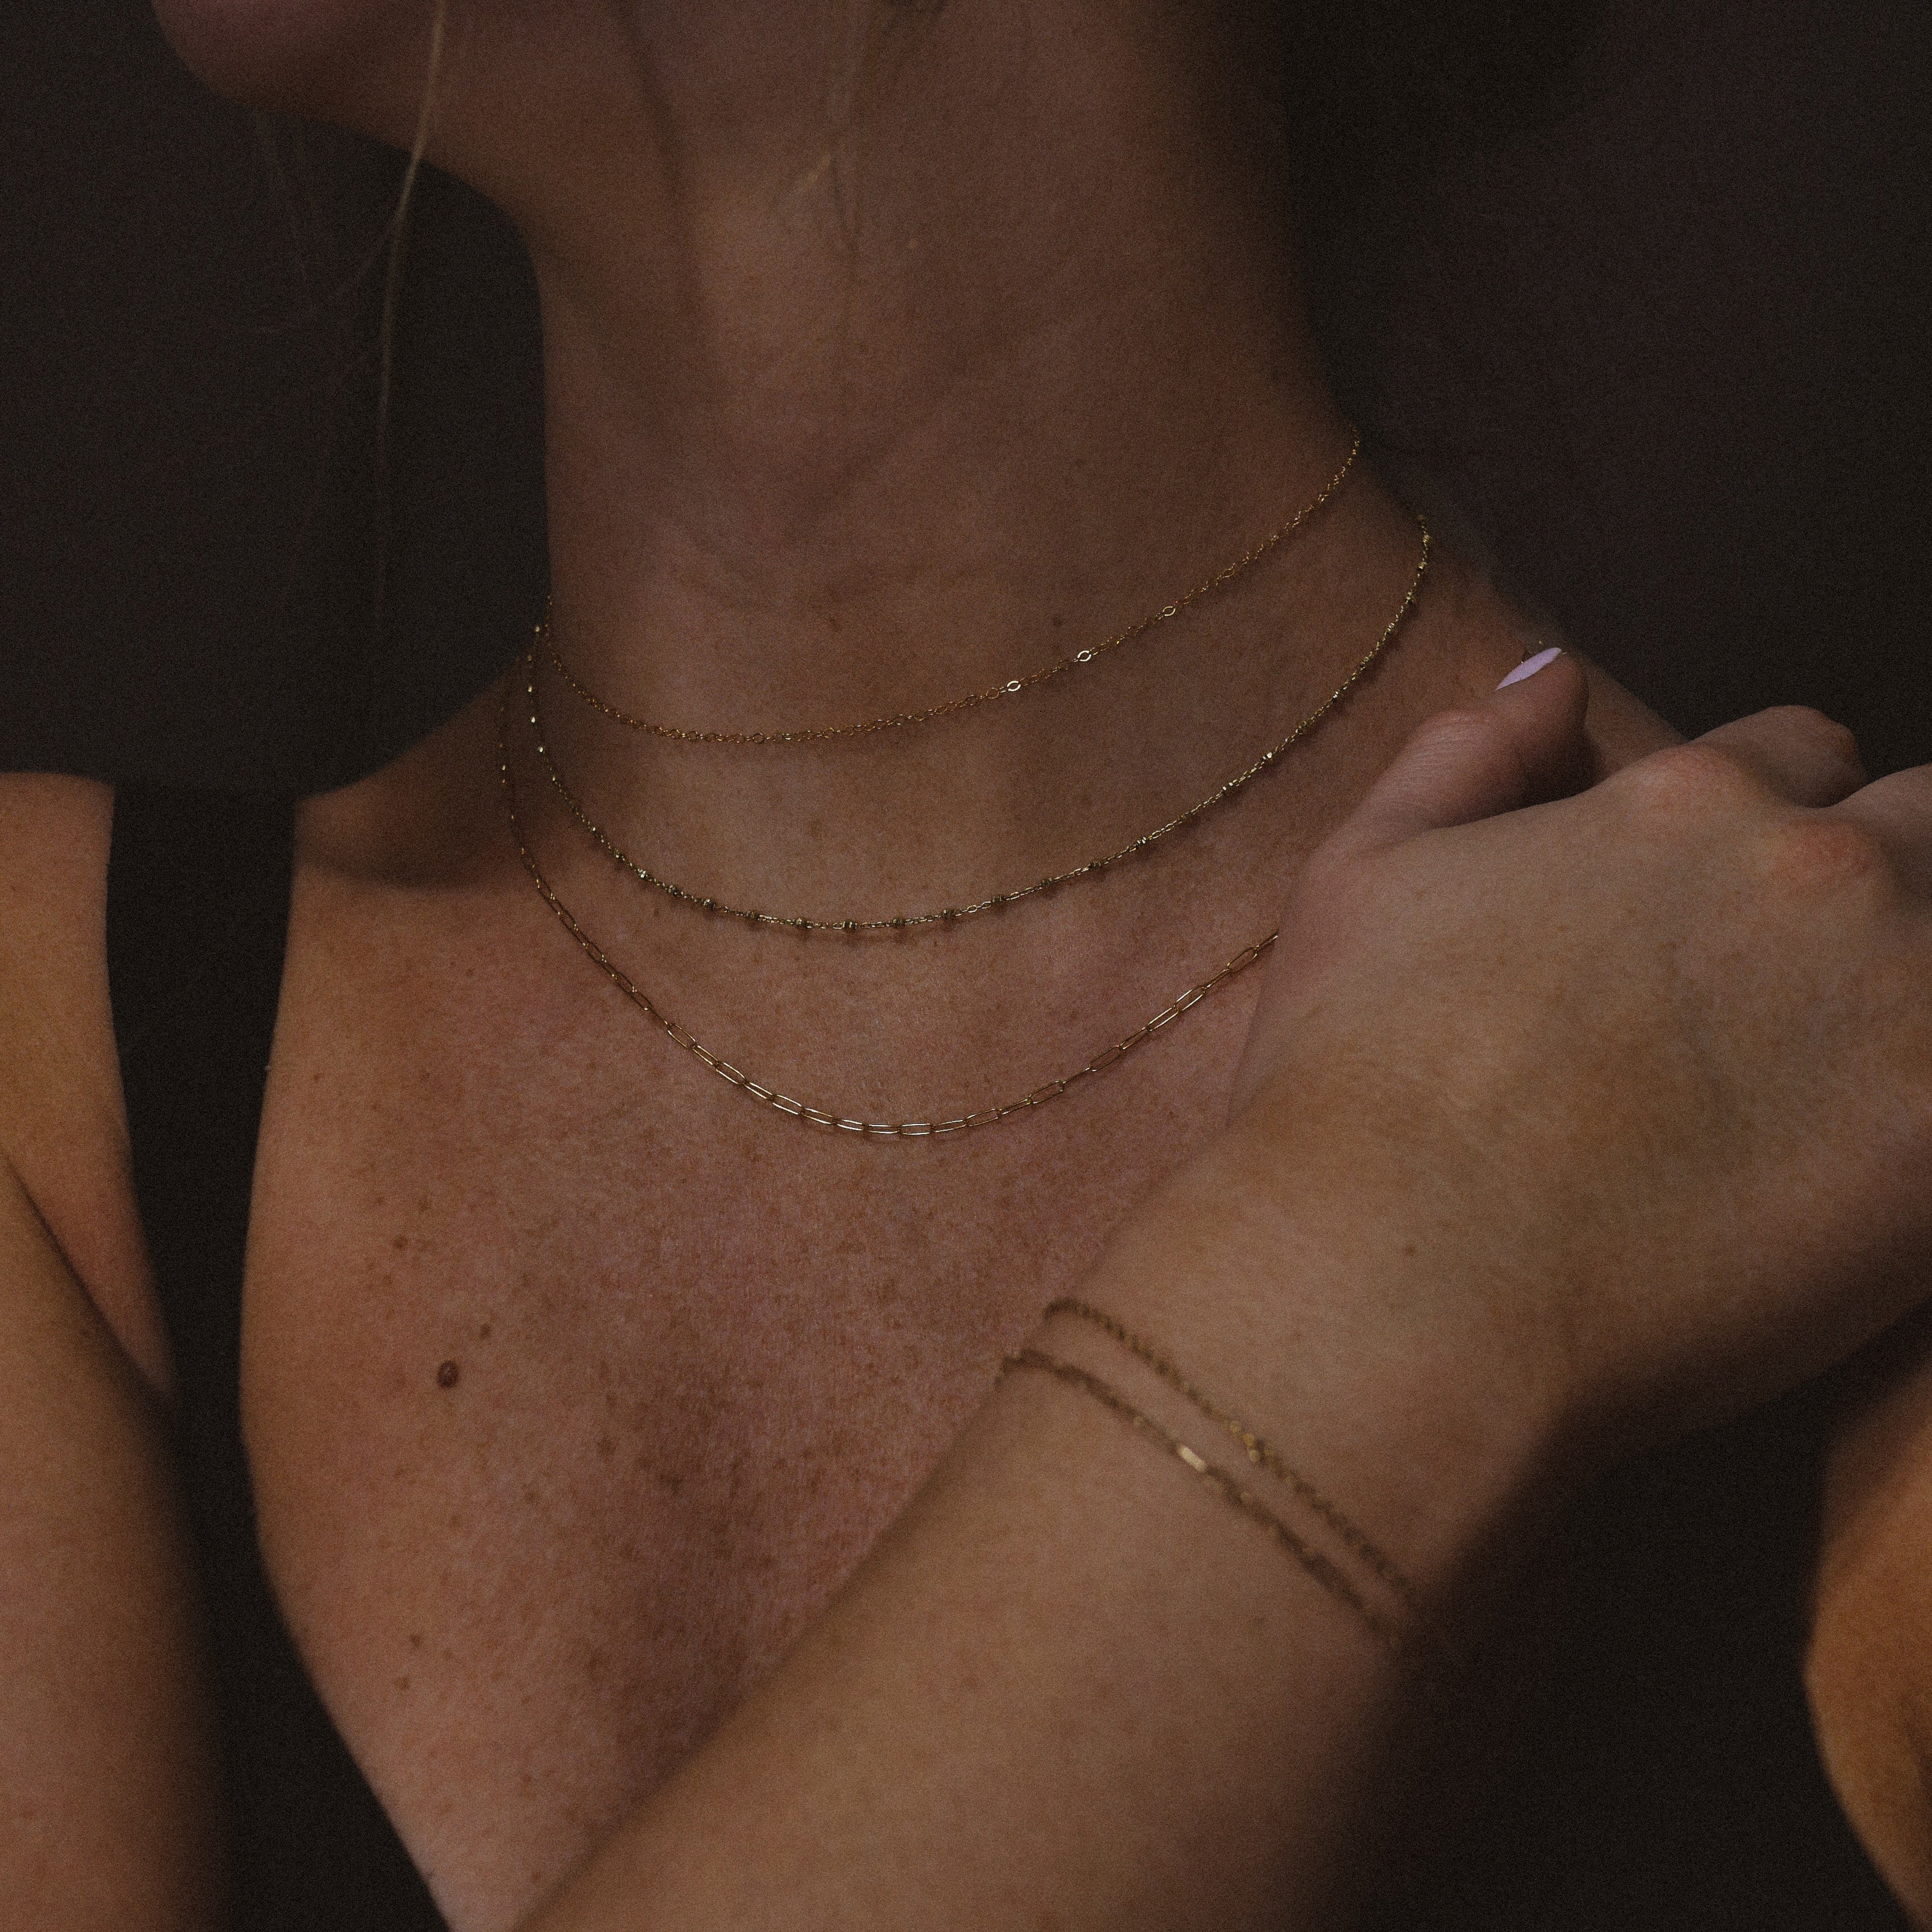 A Woman wearing permanent gold jewelry necklaces and bracelets